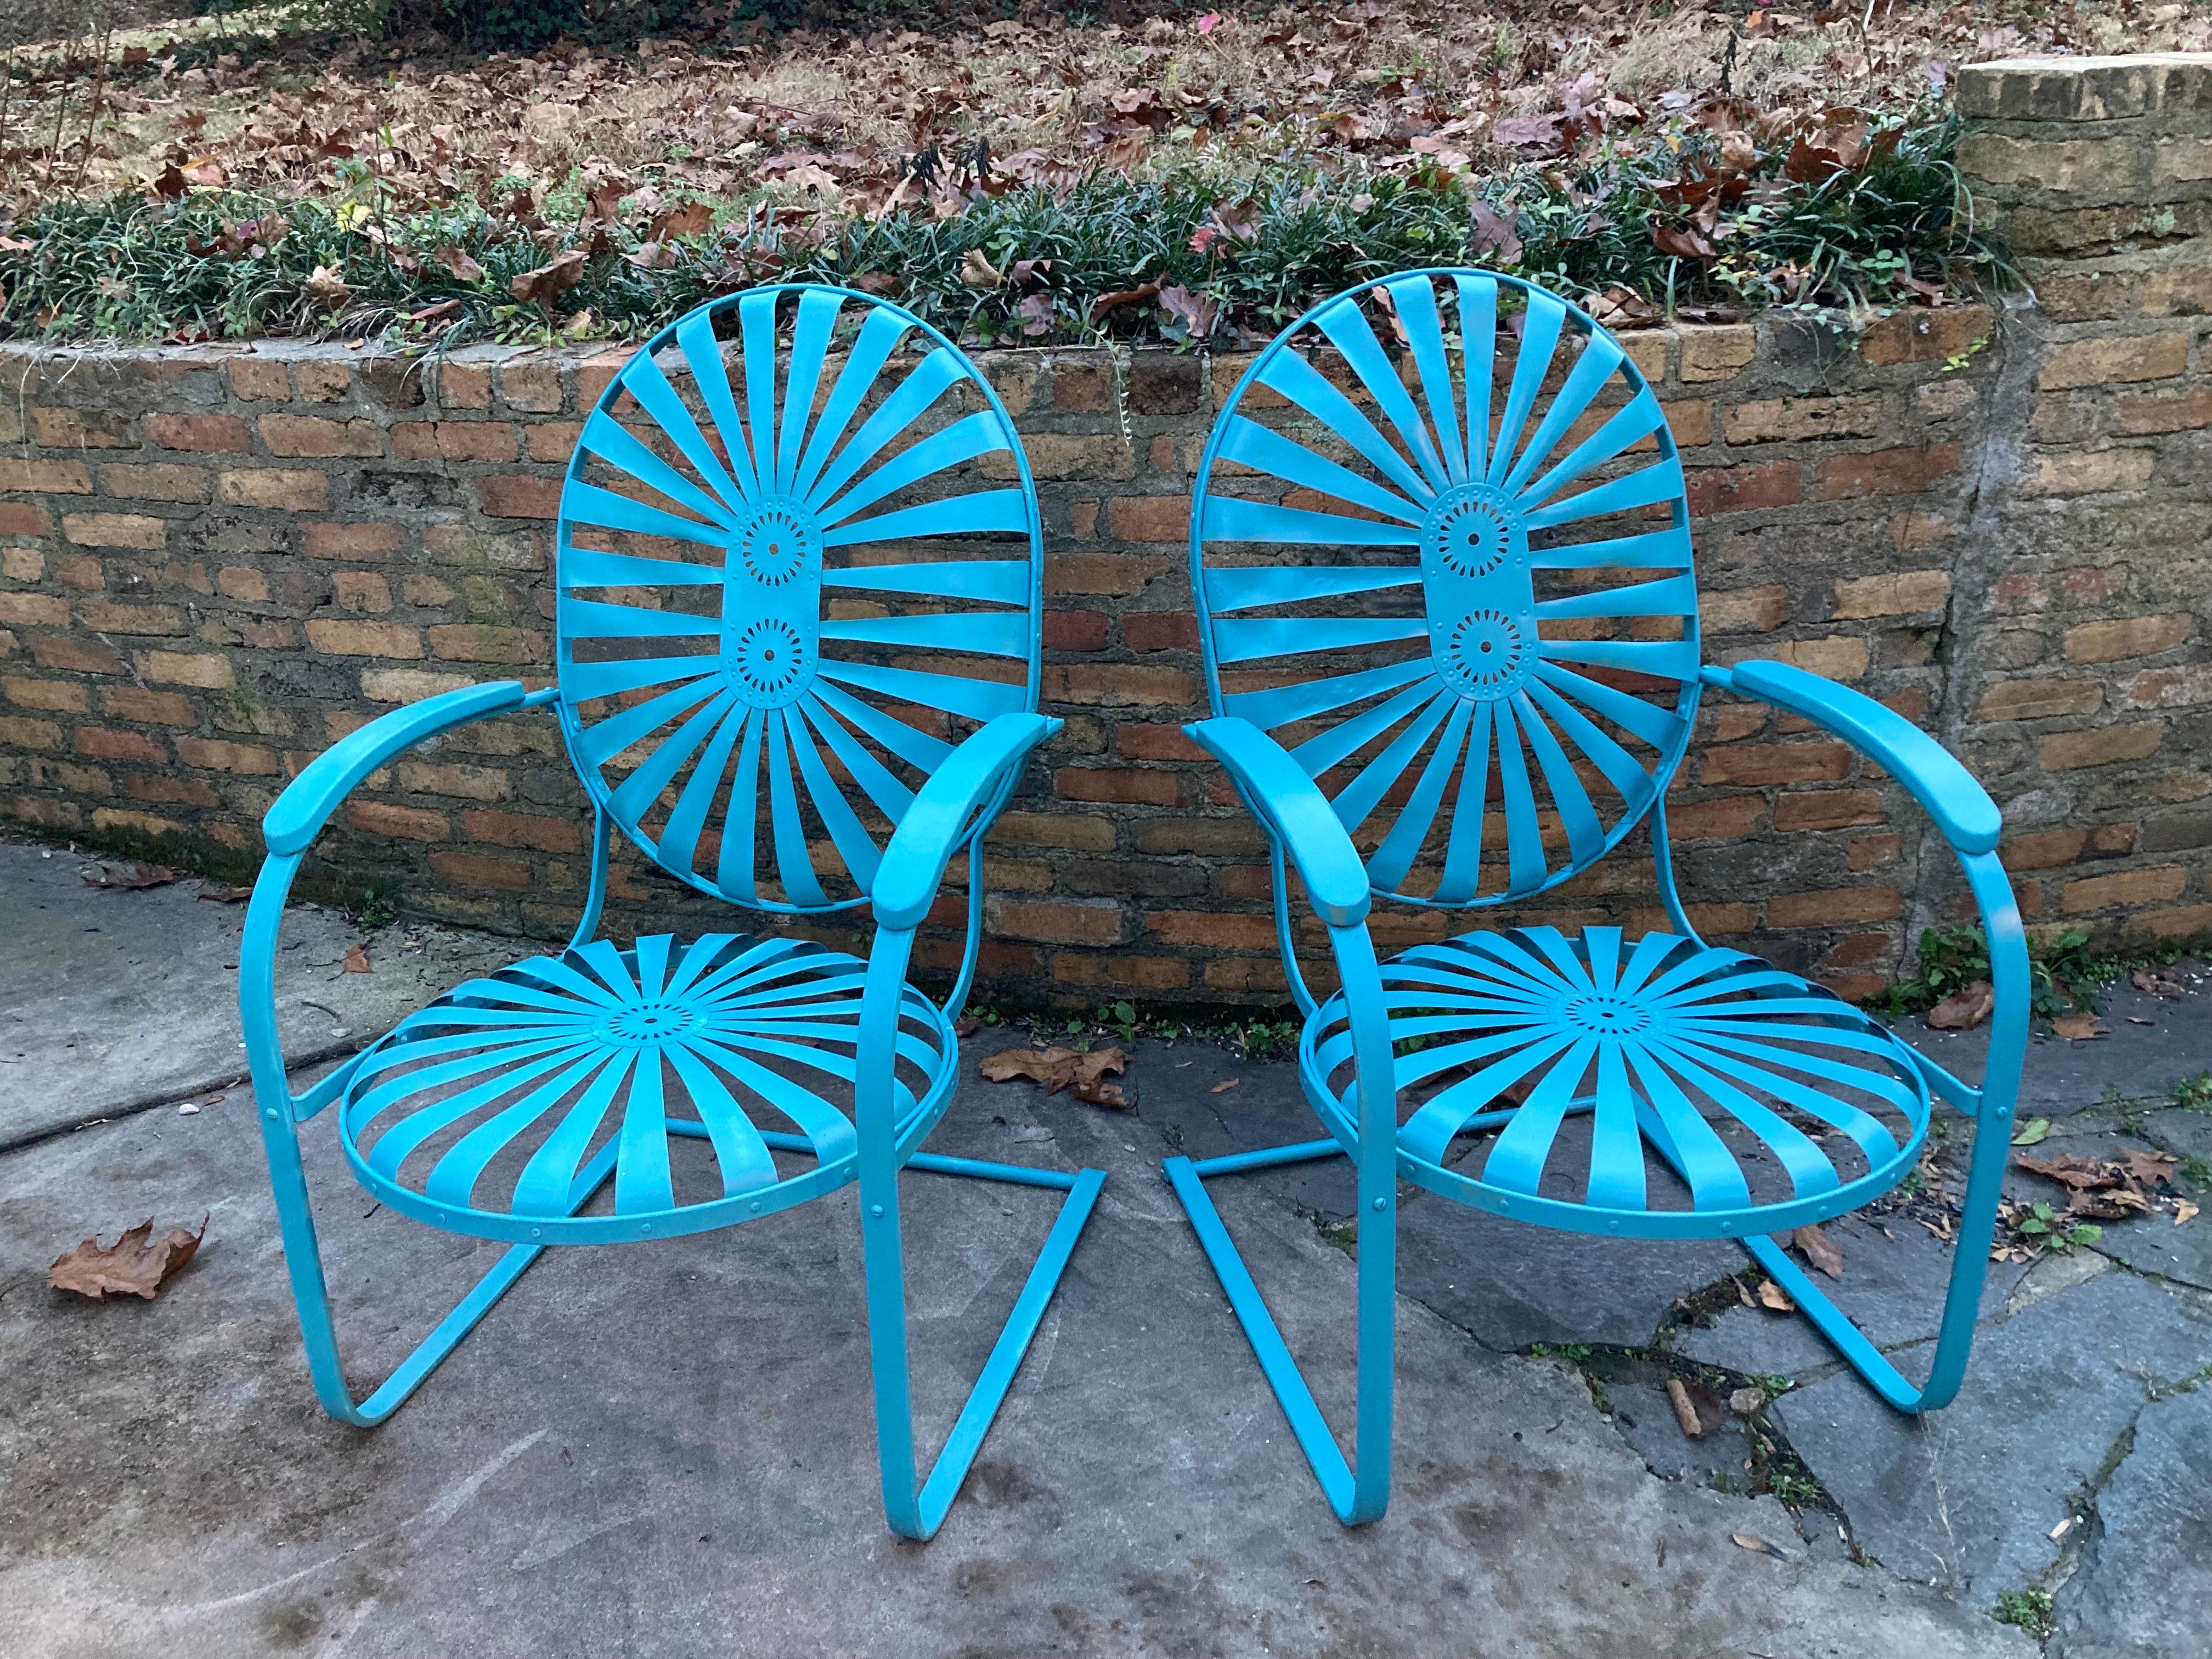 Francois Carre Cantilever Garden Chairs
a glorious pair in vintage teal blue
circa 1930
measuring 25 wide, 26 deep and 41.5 tall

shipping from athens, ga